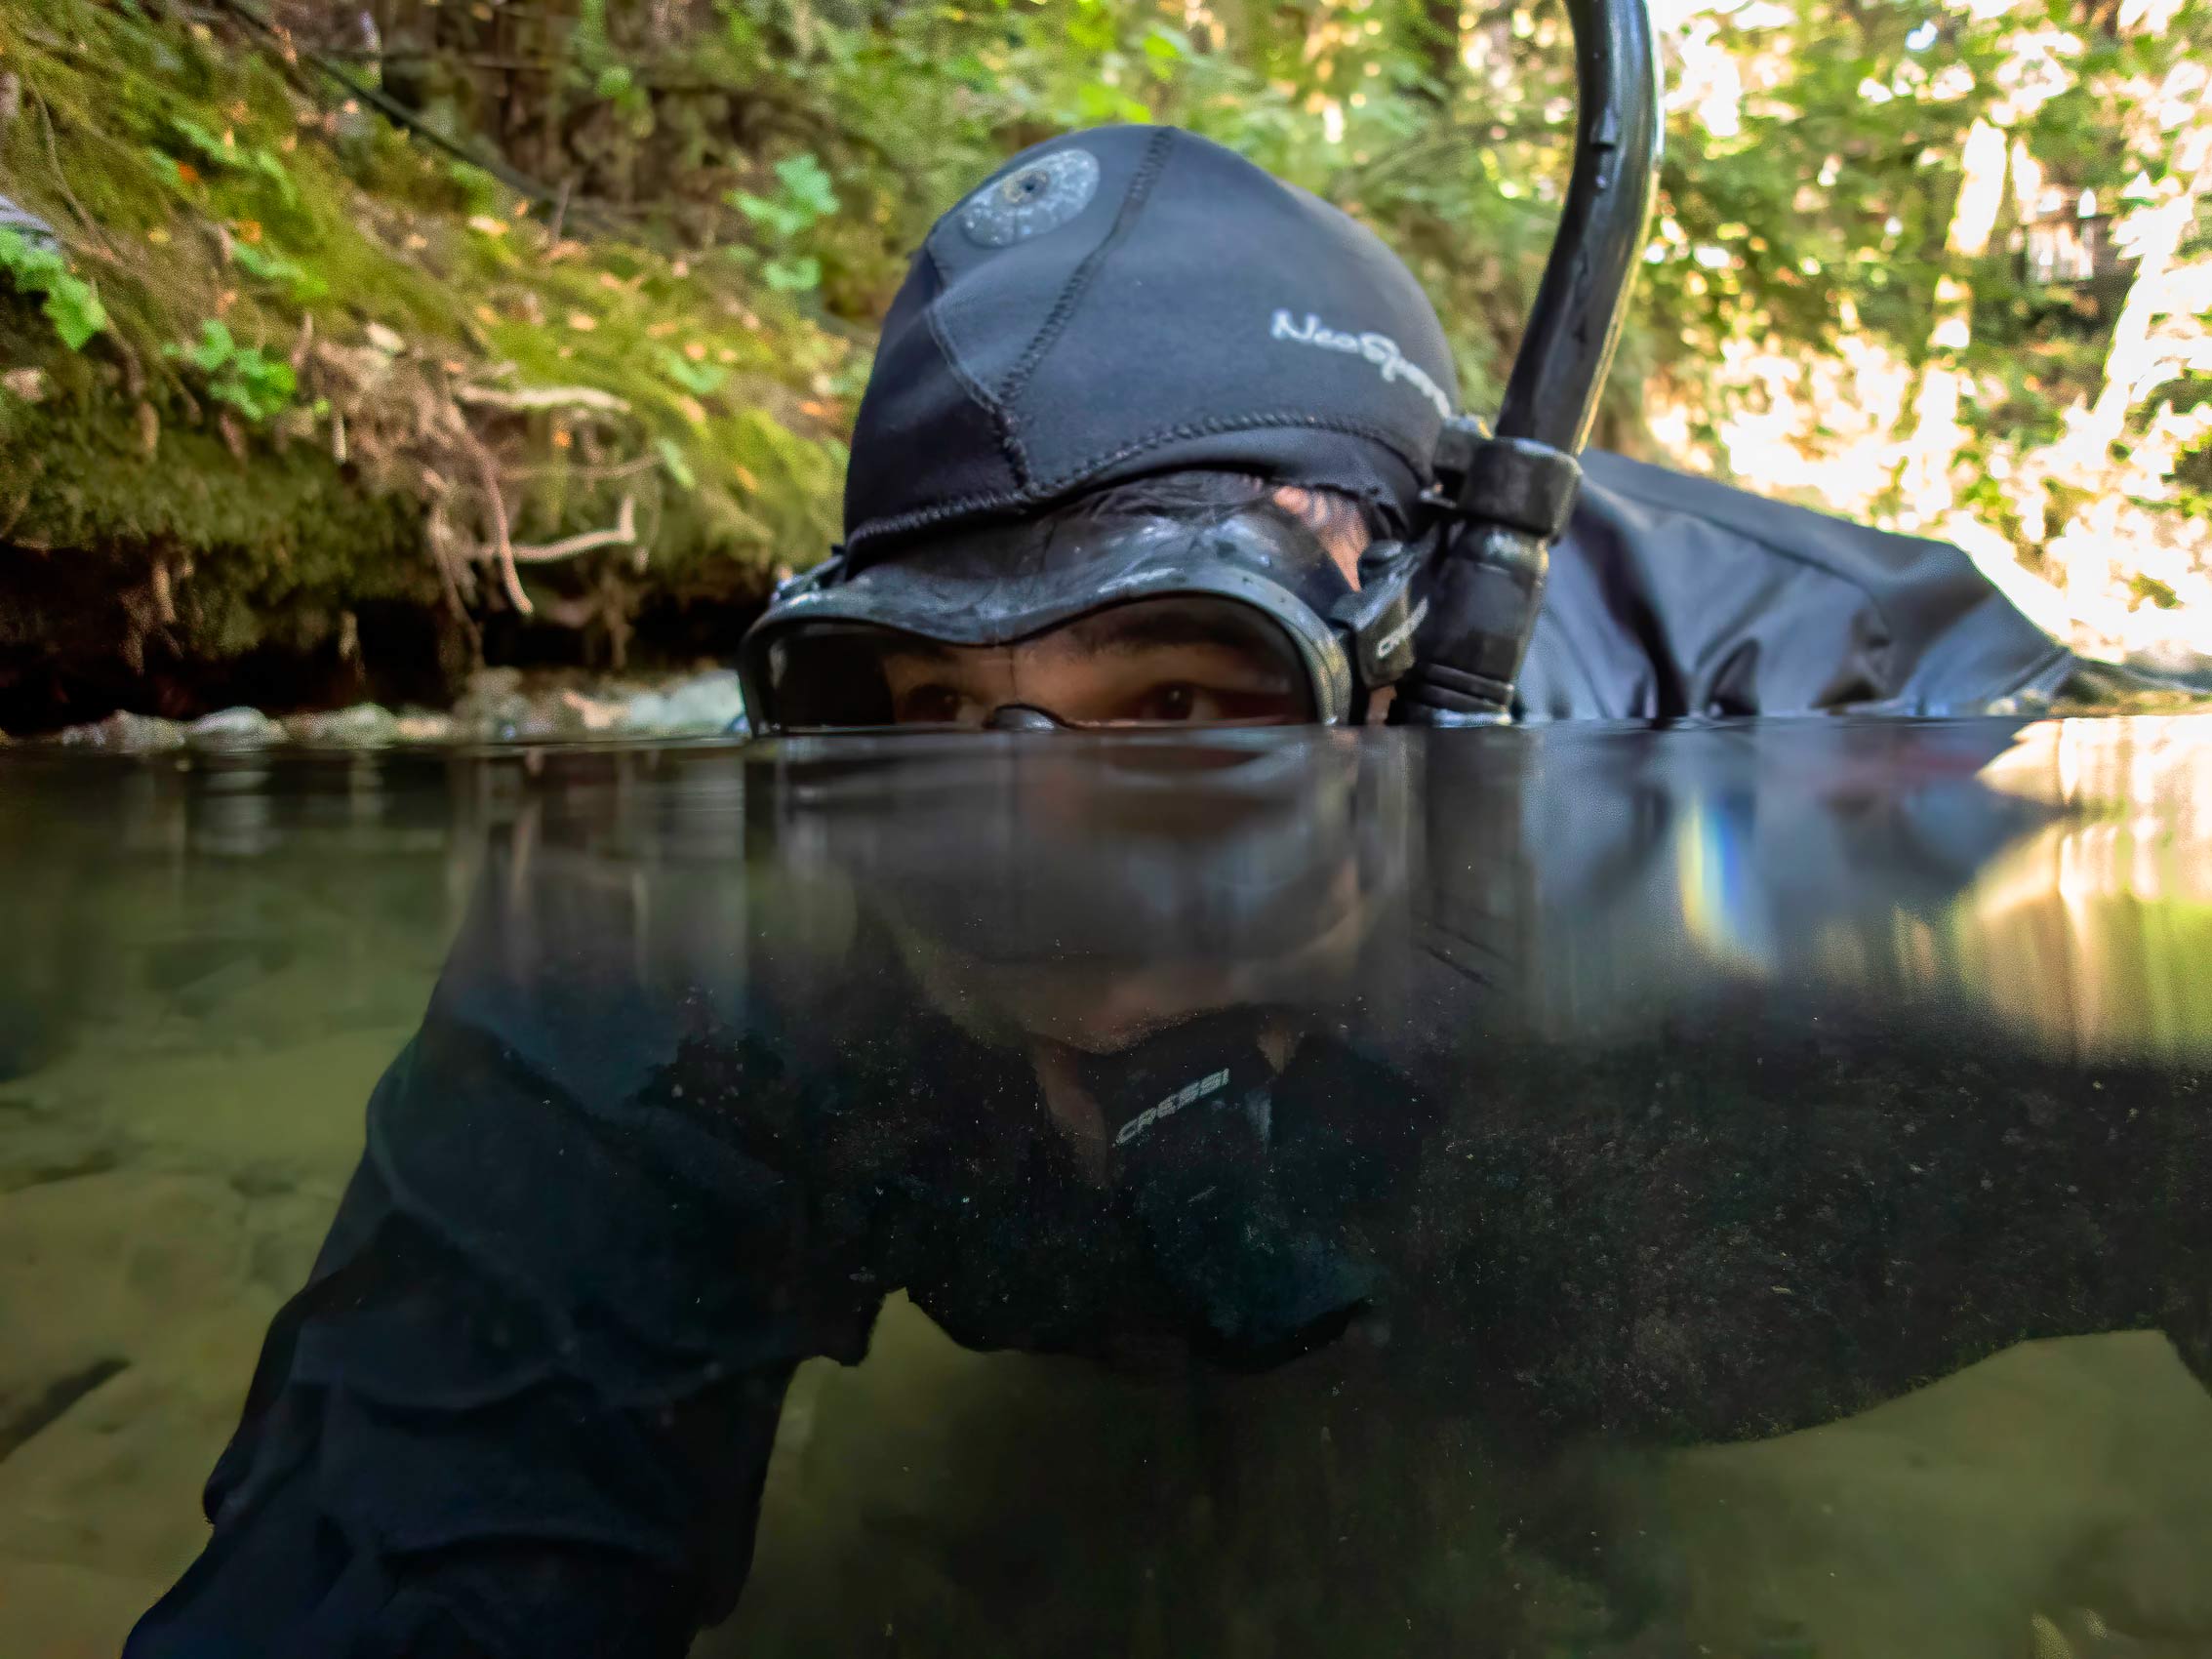 Researcher in Wetsuit Swims in Stream